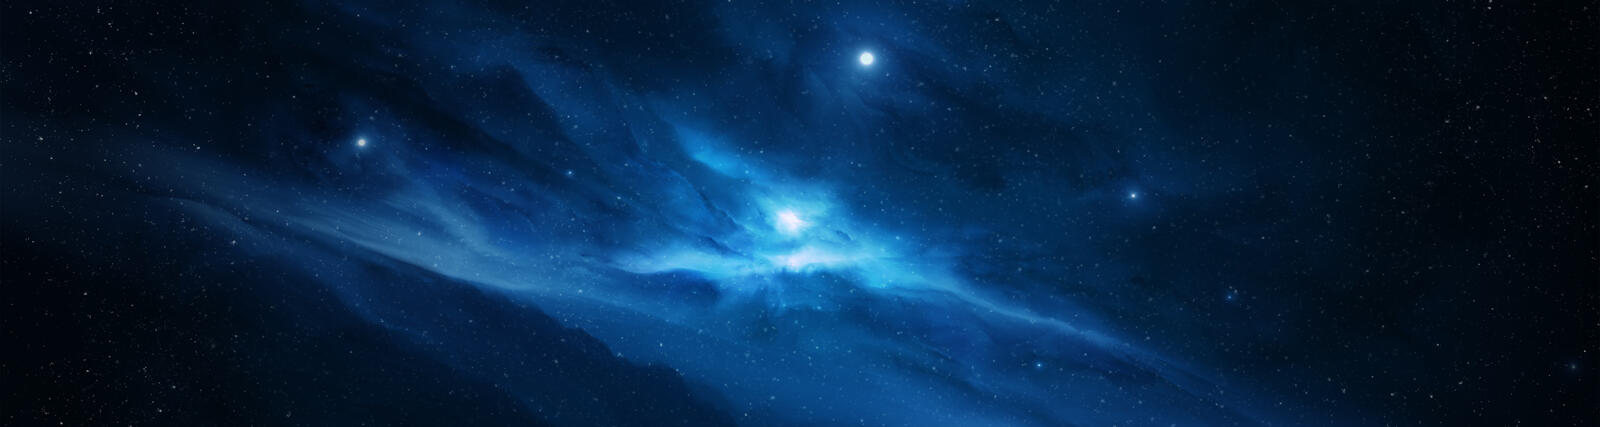 Wallpapers the birth of stars four stars a flash on the desktop